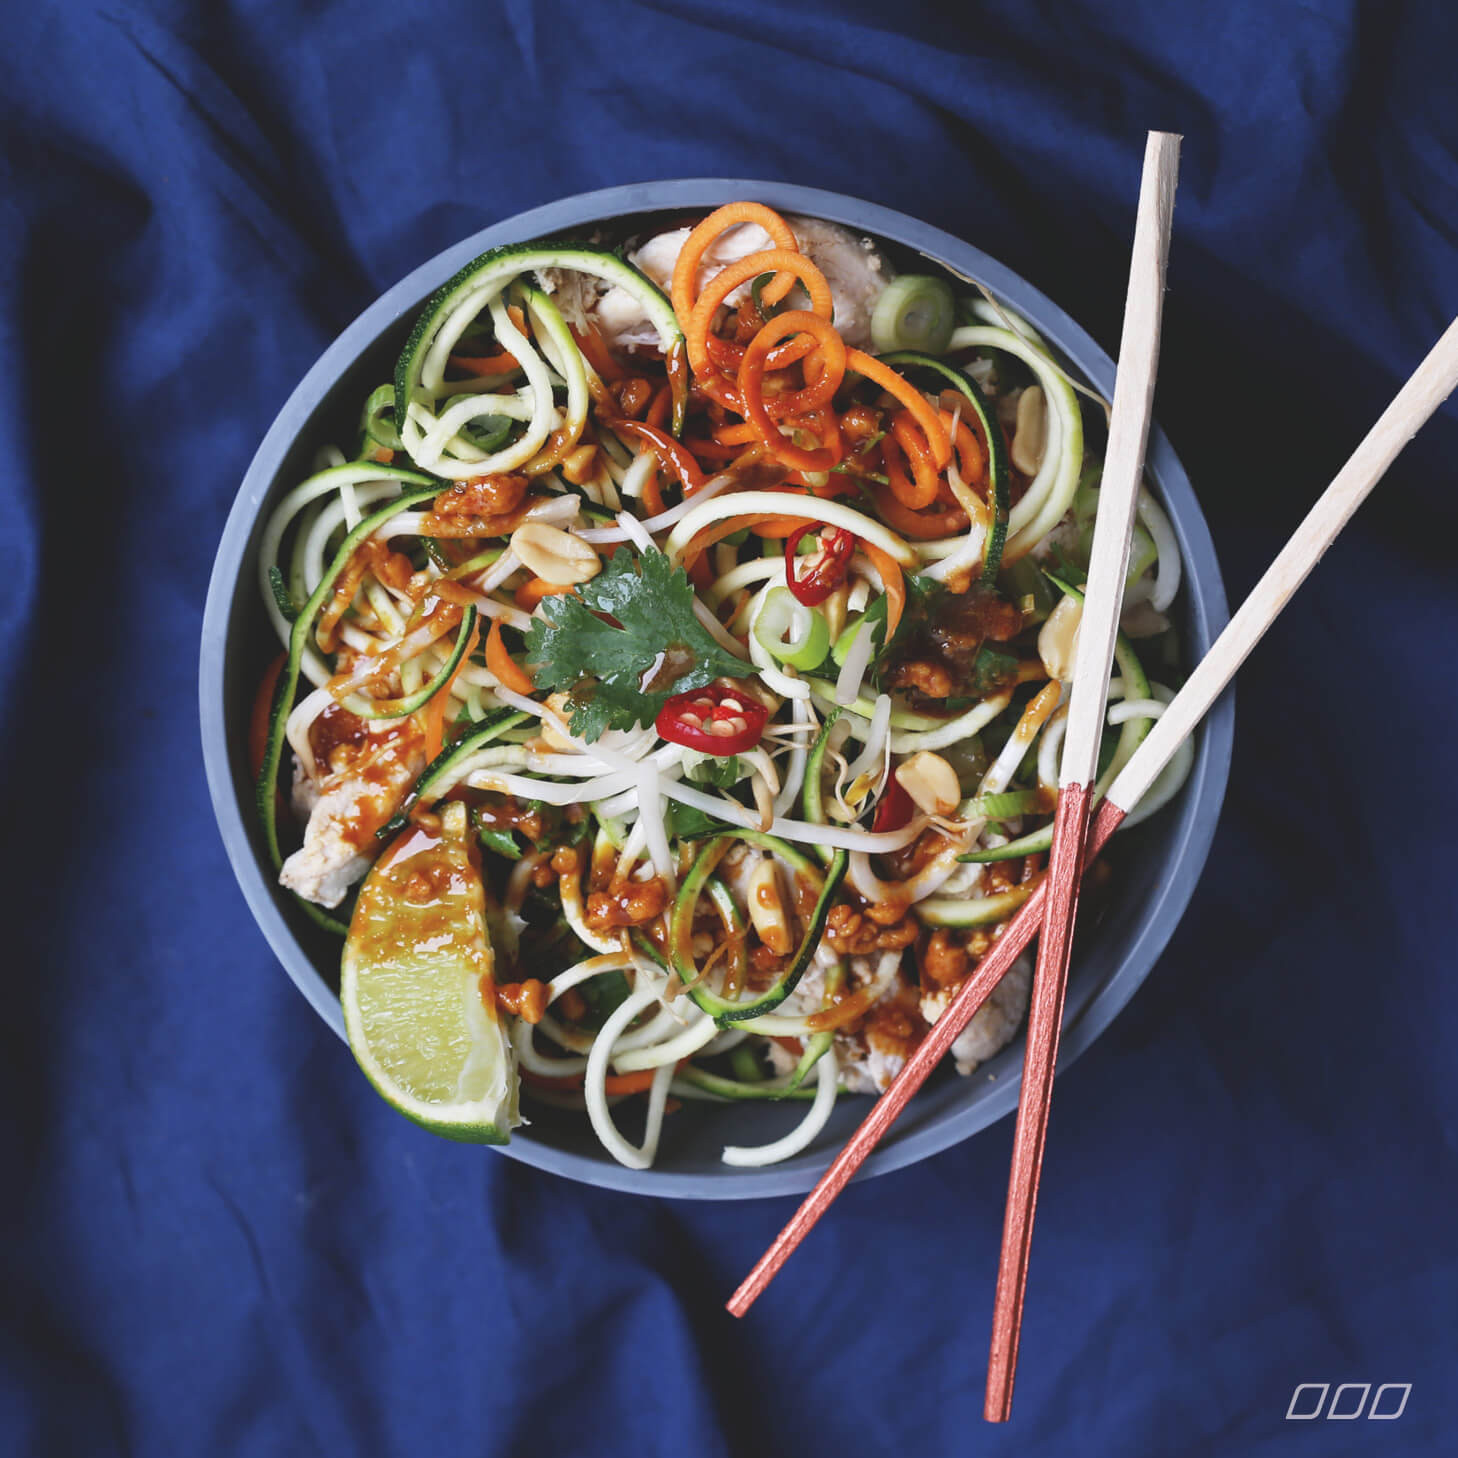 Is Chicken Pad Thai Healthy
 The Secret to Making Healthy Chicken Pad Thai Move